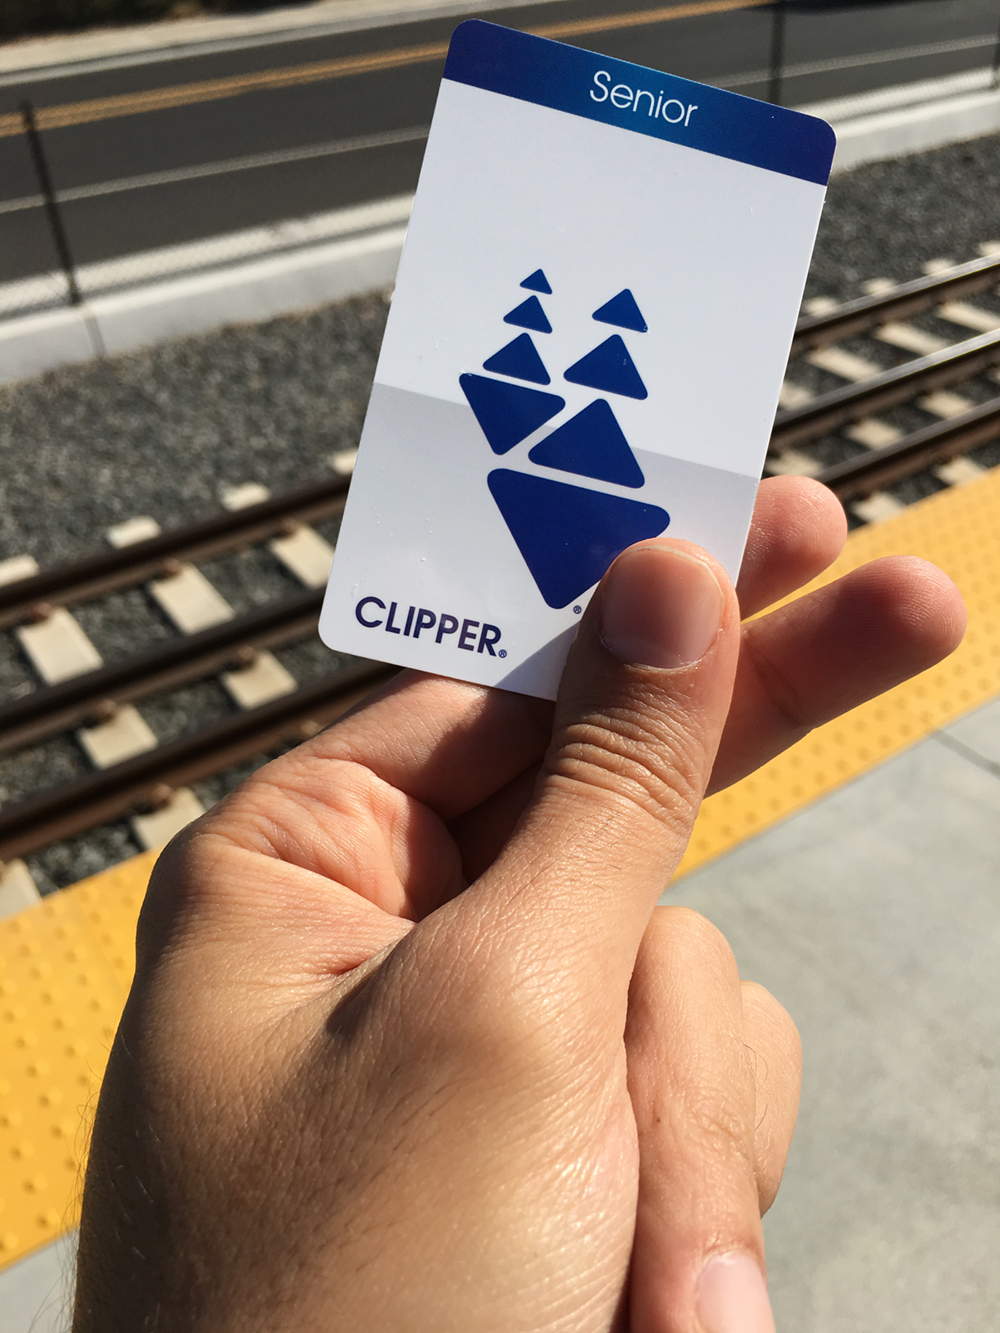 where can i use my clipper card